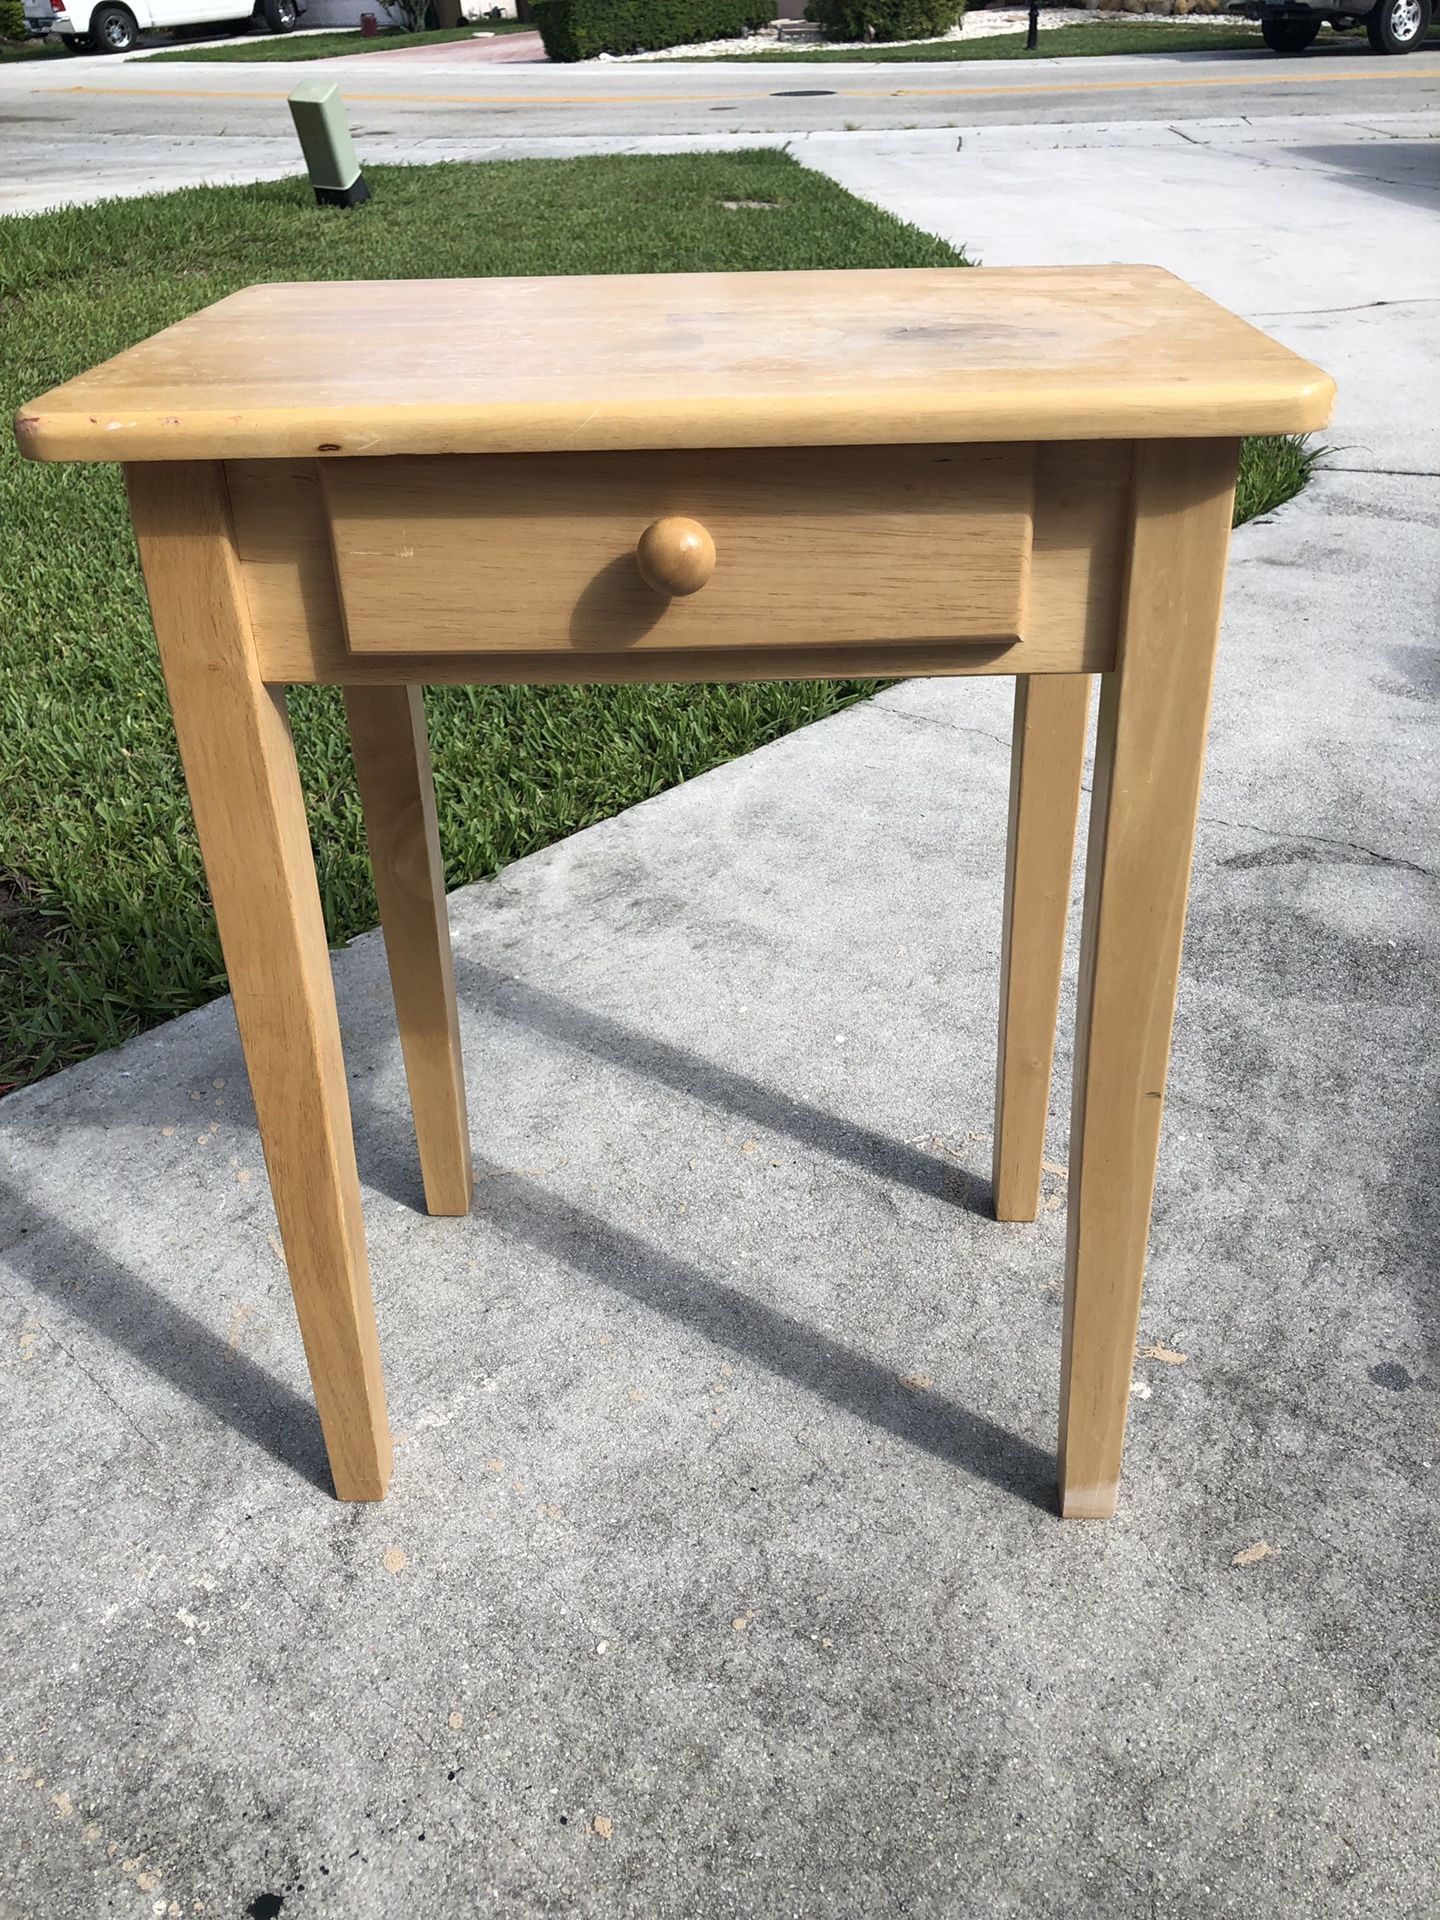 Small wood desk / side table 22x16x26